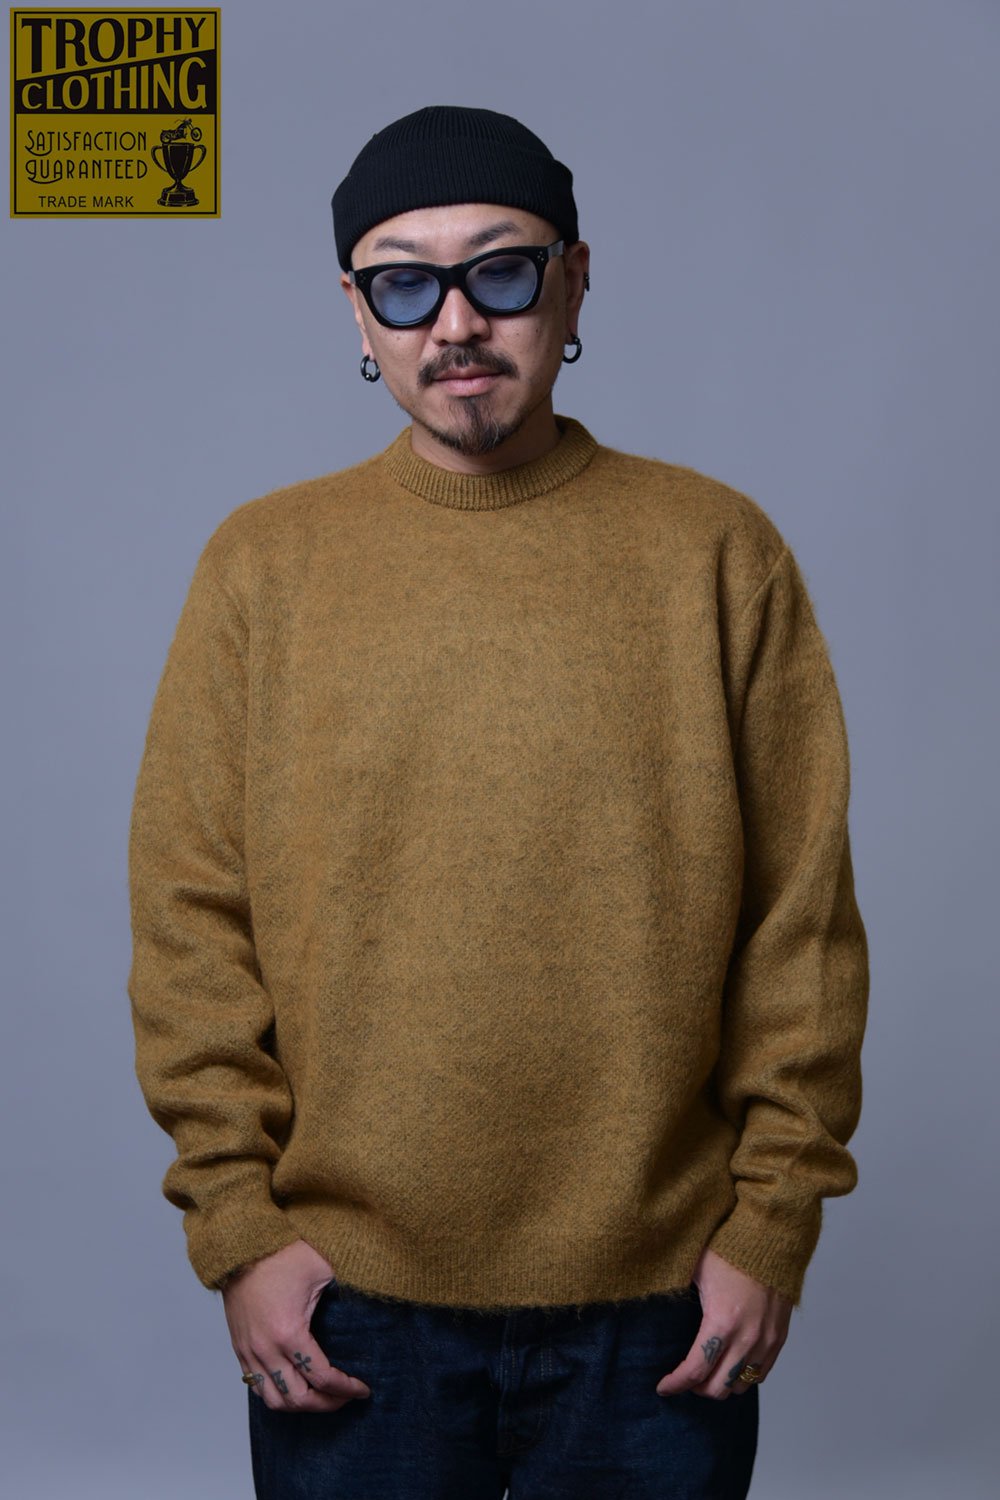 TROPHY CLOTHING(トロフィークロージング) モヘアニットセーター MOHAIR KNIT CREW NECK SWEATER  TR22AW-210 通販正規取扱 | ハーレムストア公式通販サイト